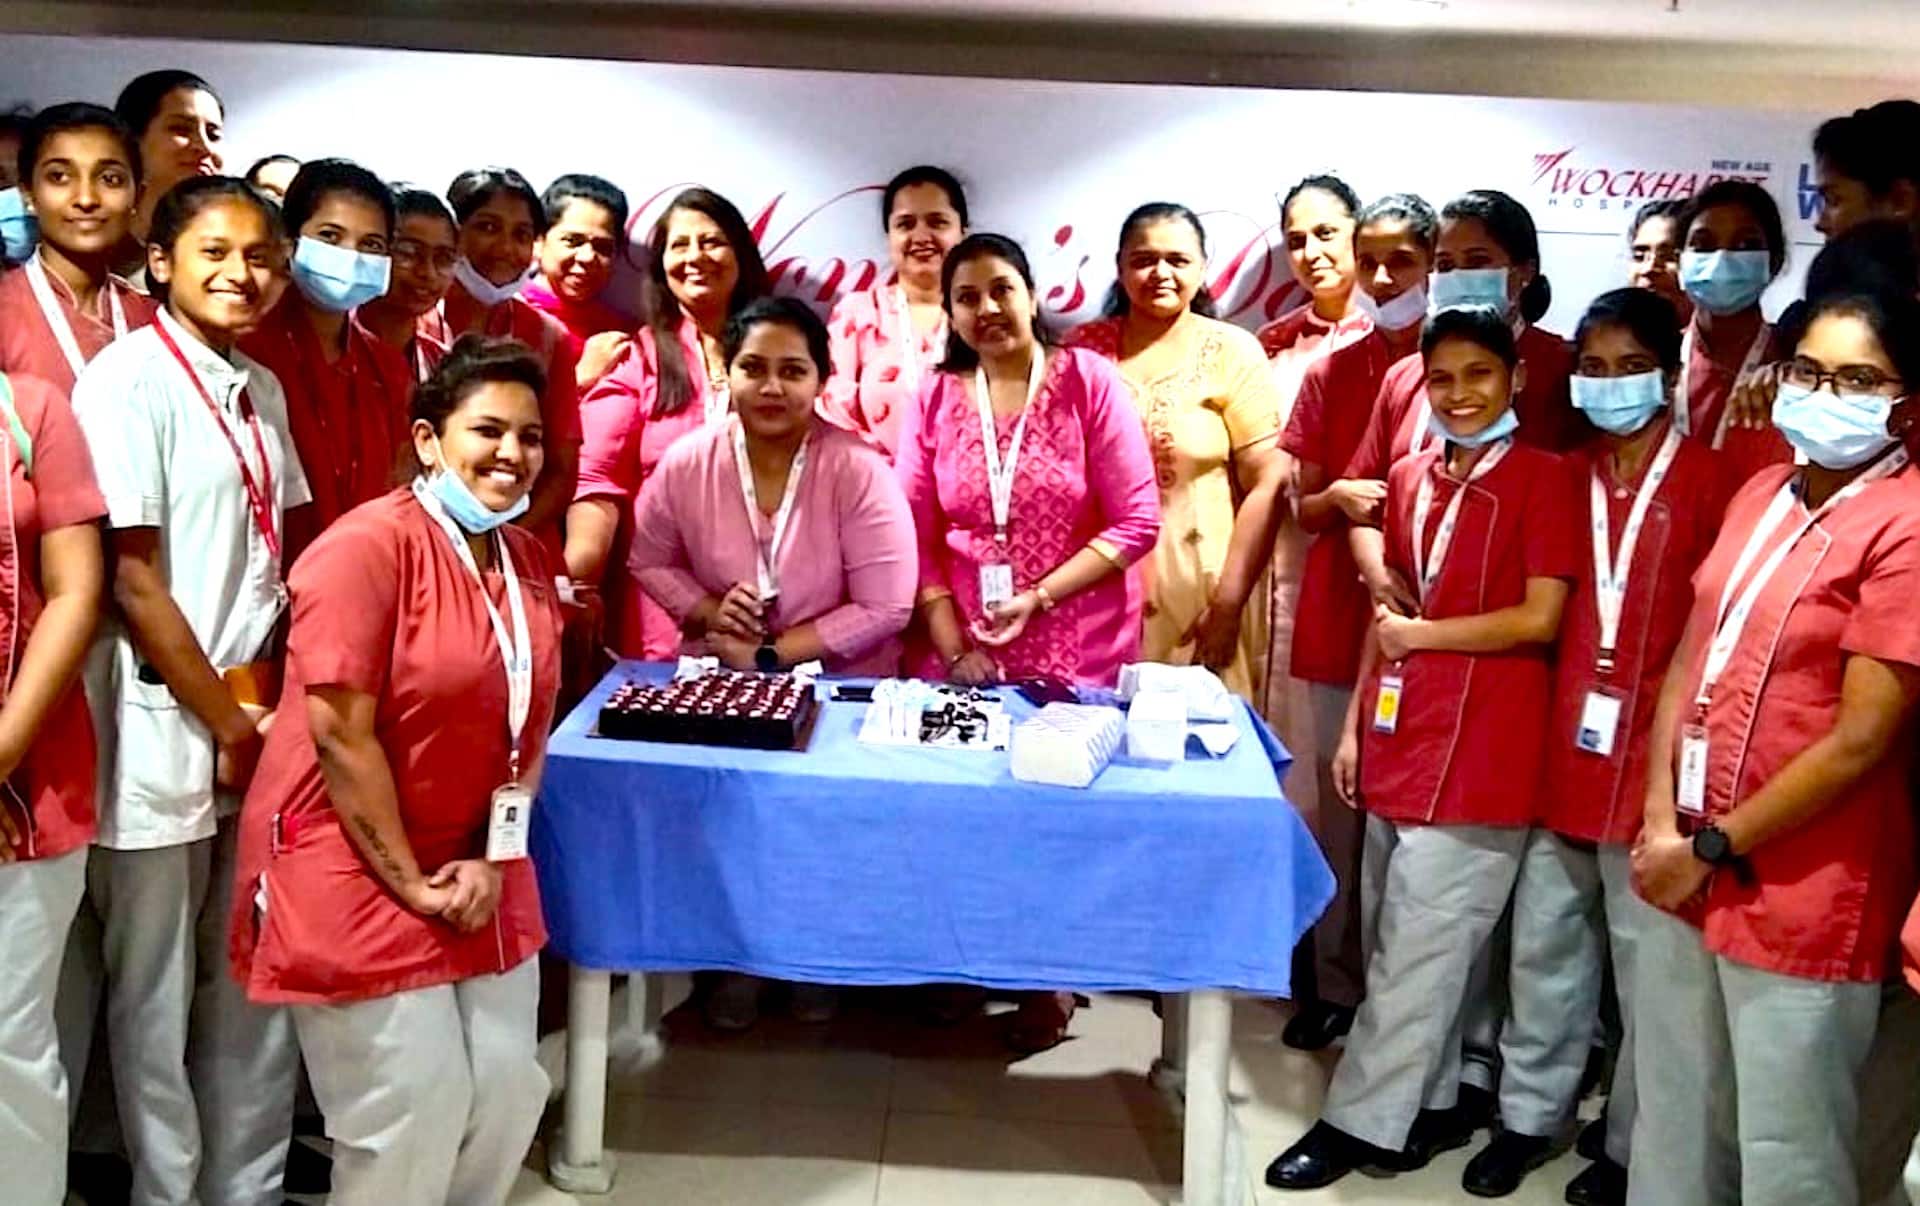 Wockhardt Hospitals, Mumbai Central kicks off their campaign “I am Fearless” & celebrates Women’s day with their women staff.